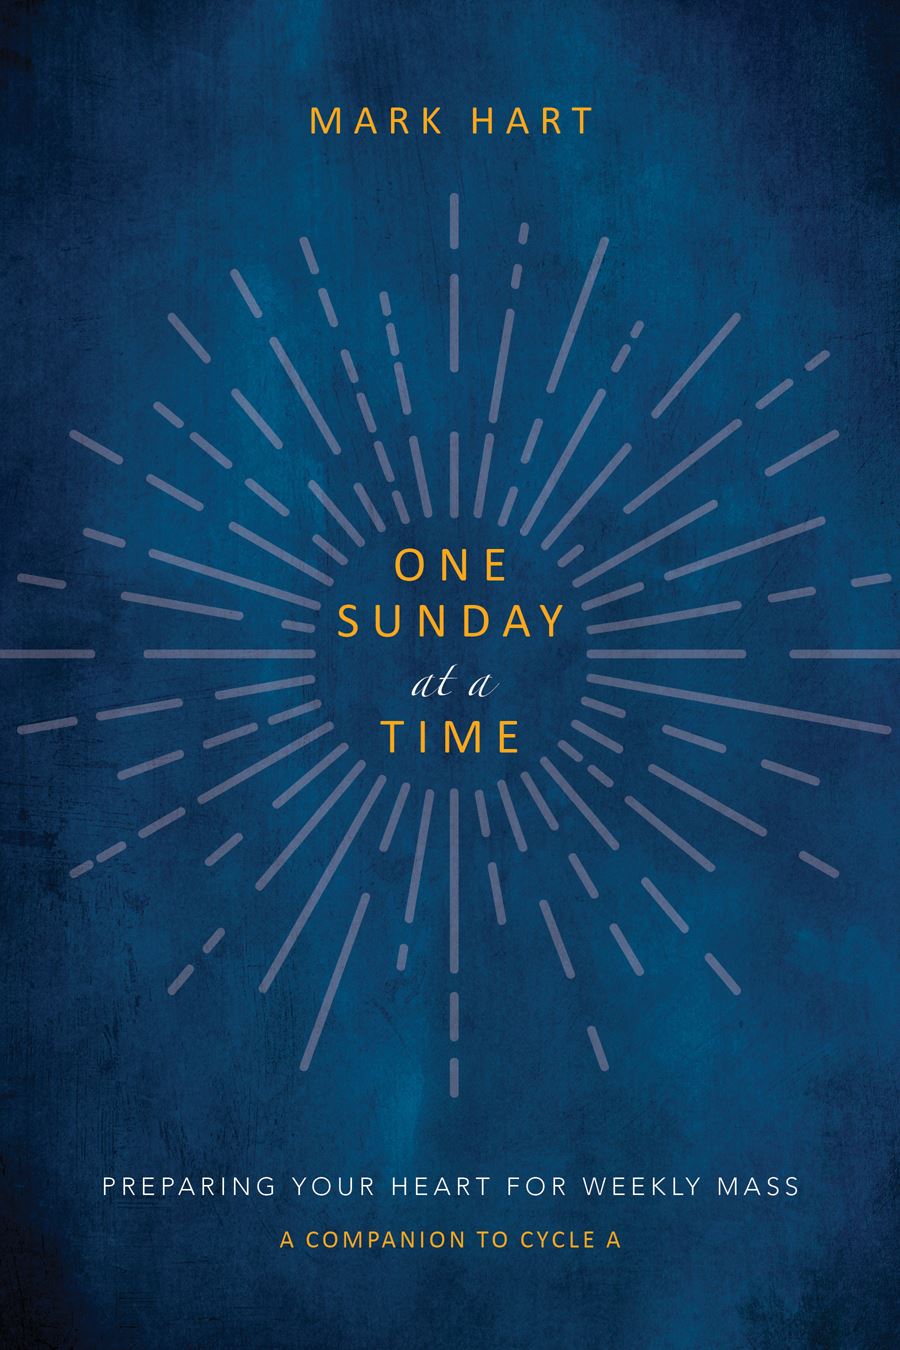 One Sunday at a Time Preparing Your Heart for Weekly Mass Author: Mark Hart